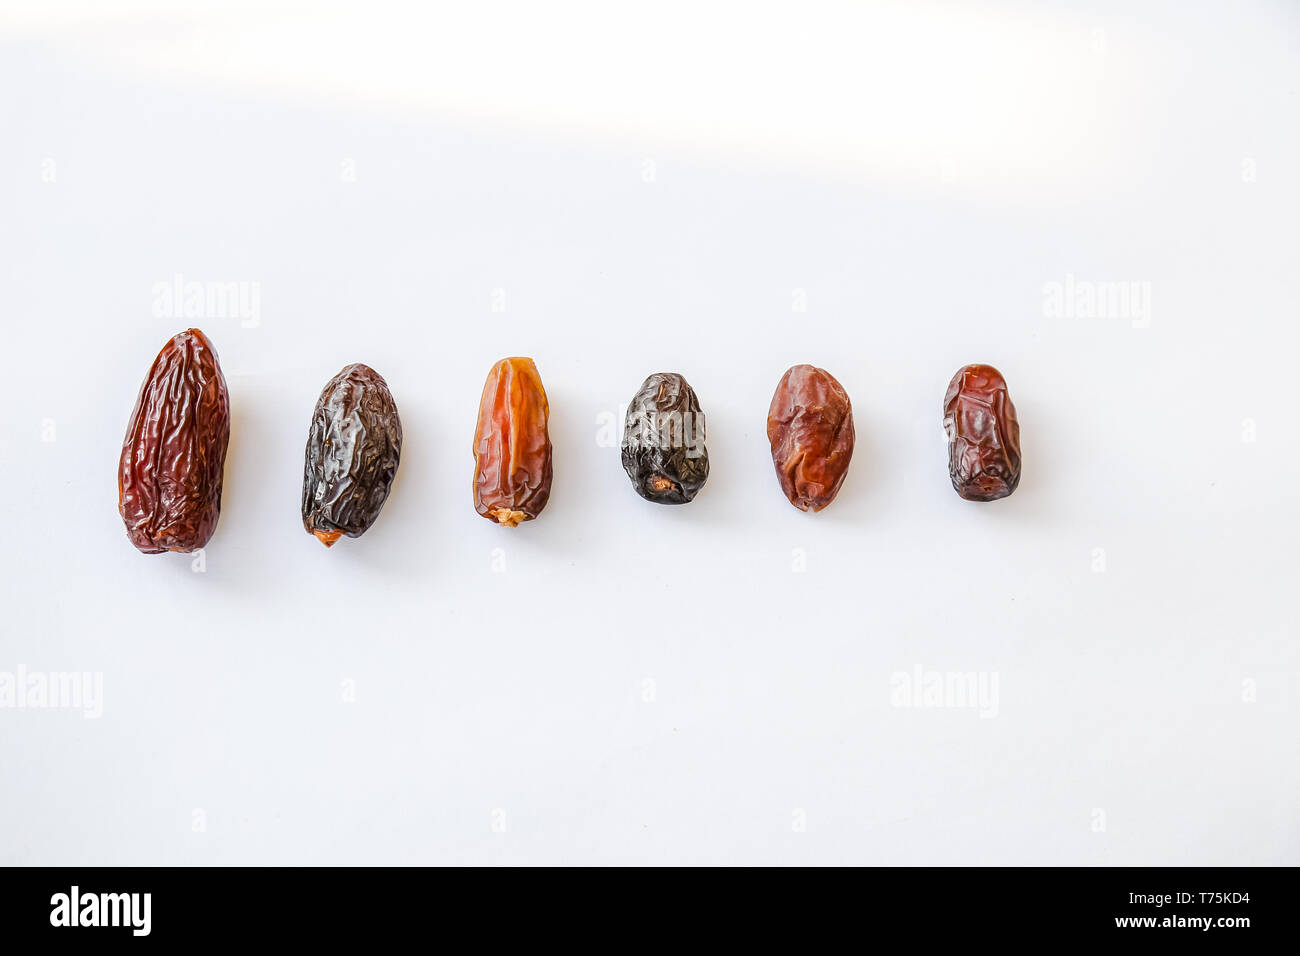 Different types of sizing dates namely from the left as King or Golden Medjool, Black Medjool, Mabroom, Ajwa, Deglet Nour and Piarom Malik Stock Photo